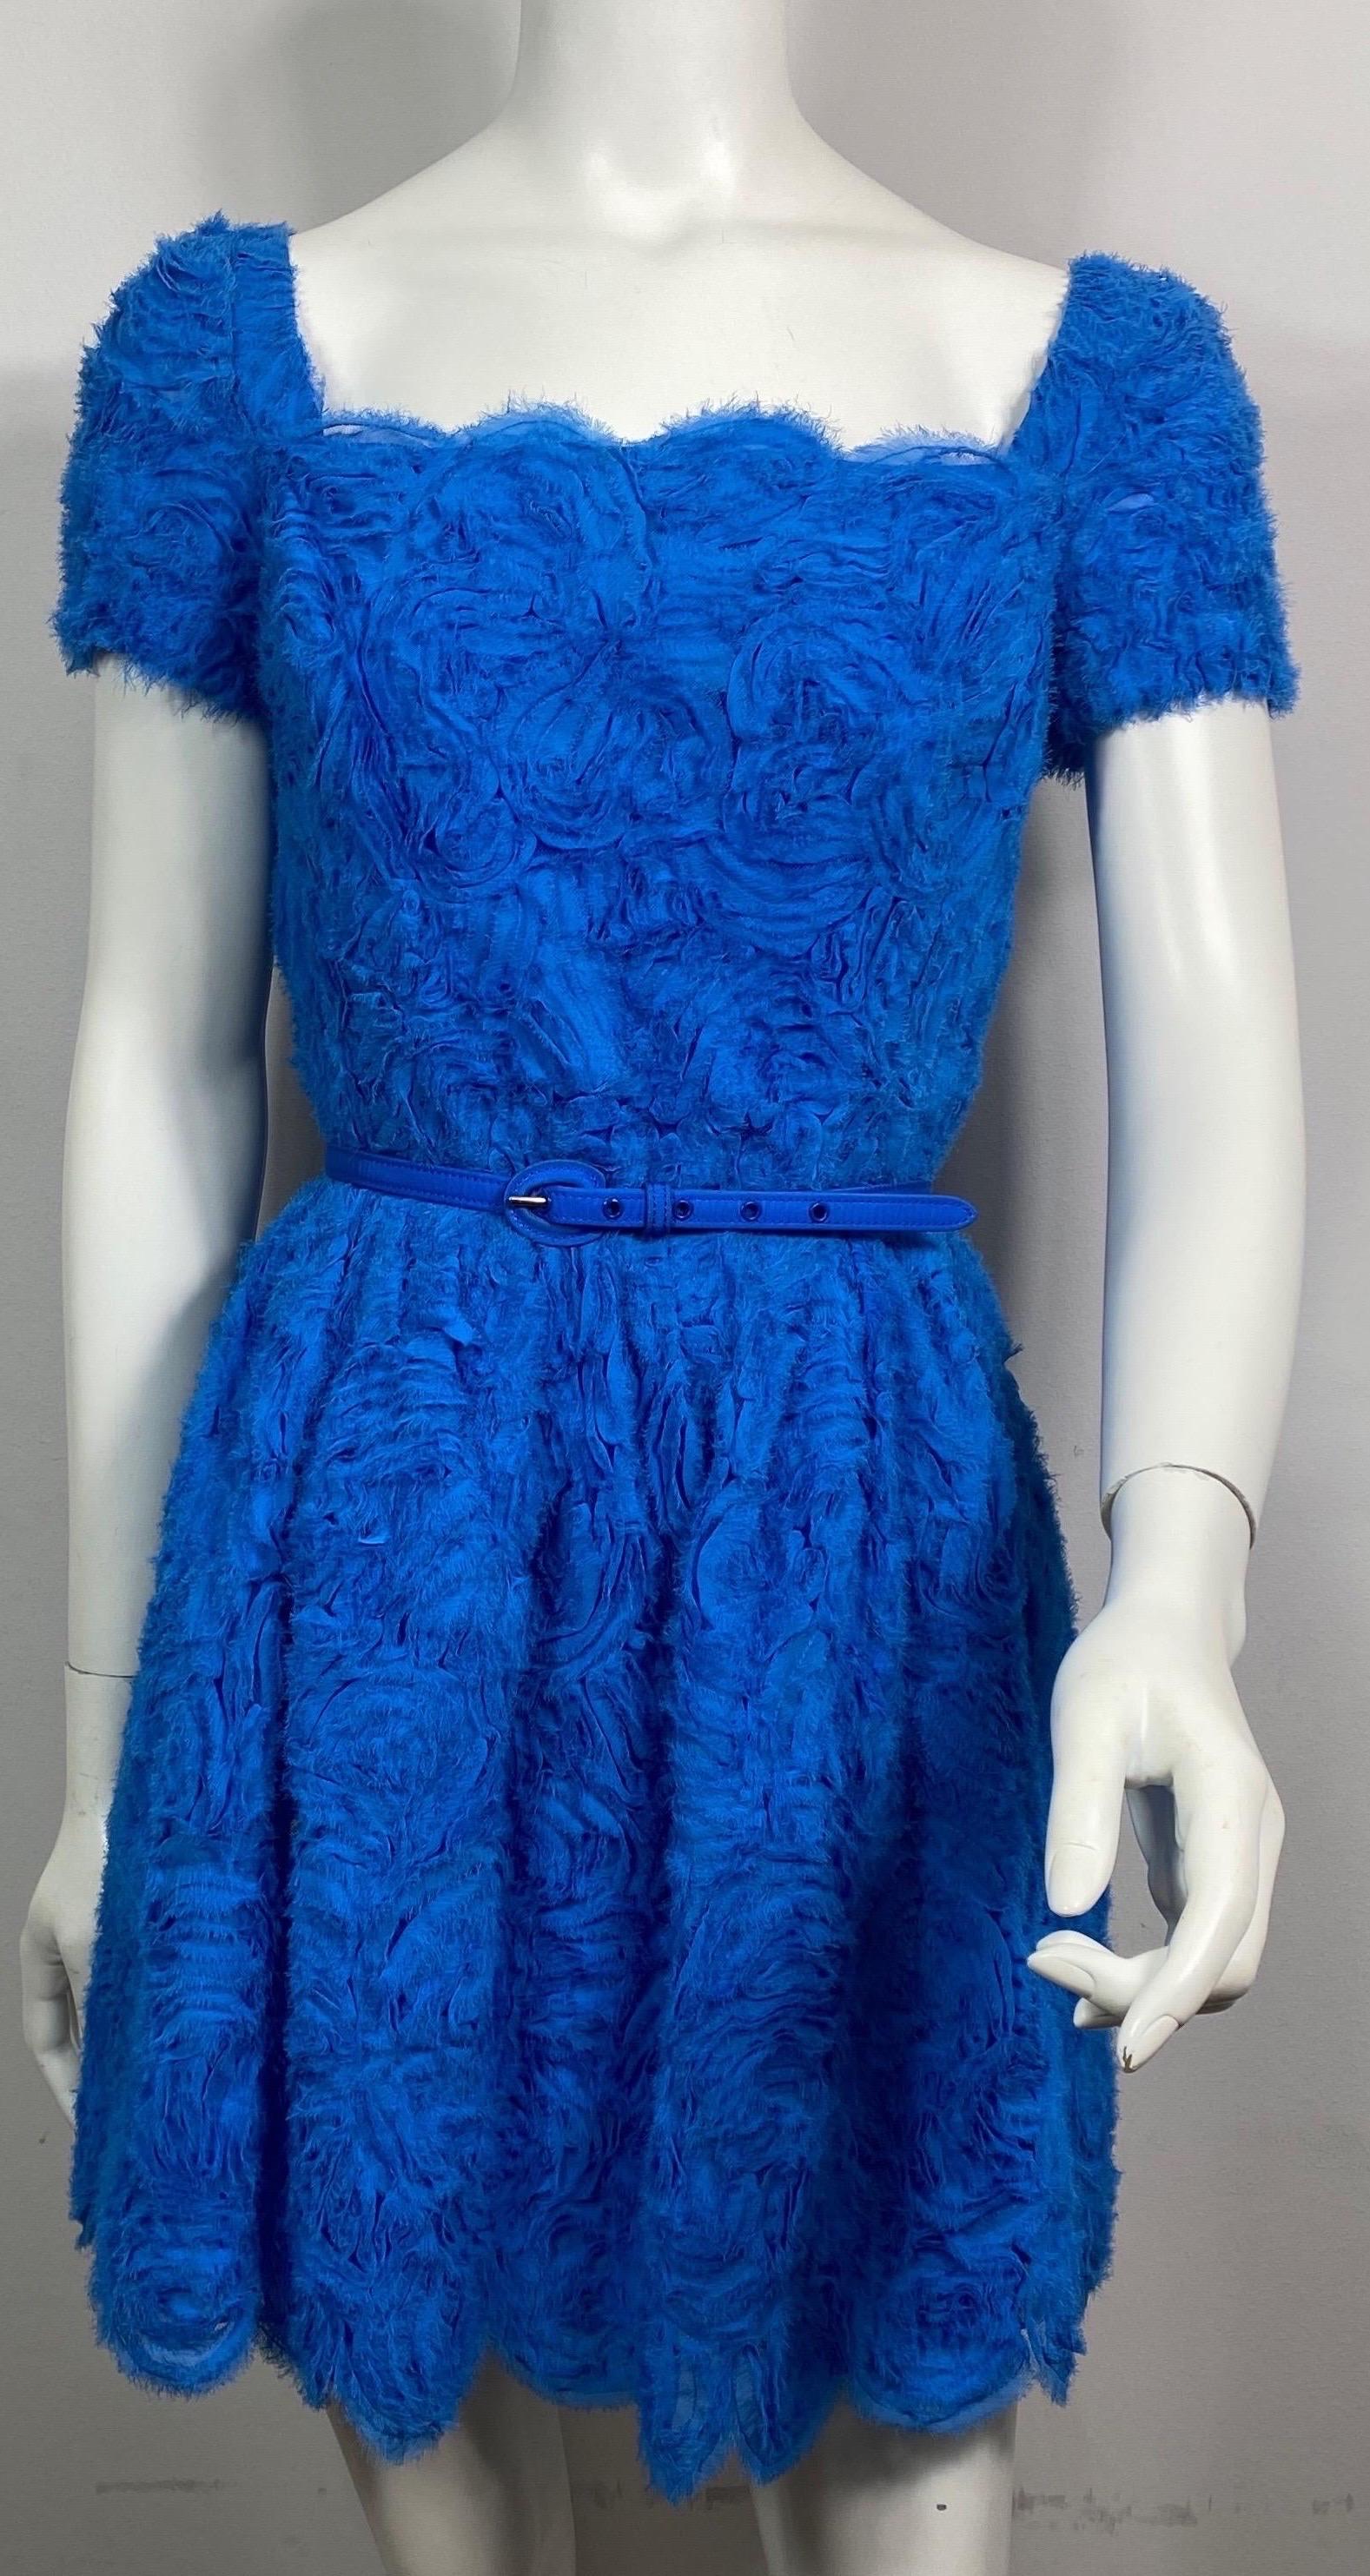 Oscar de La Renta Runway Resort 2013 Royal Blue Chiffon Rosette Embellished Dress-Size 4 This pacific royal blue somewhat mini dress is made of a fabric that is silk chiffon strips (with frayed edges) hand sewn as appliqué’s onto a mesh forming